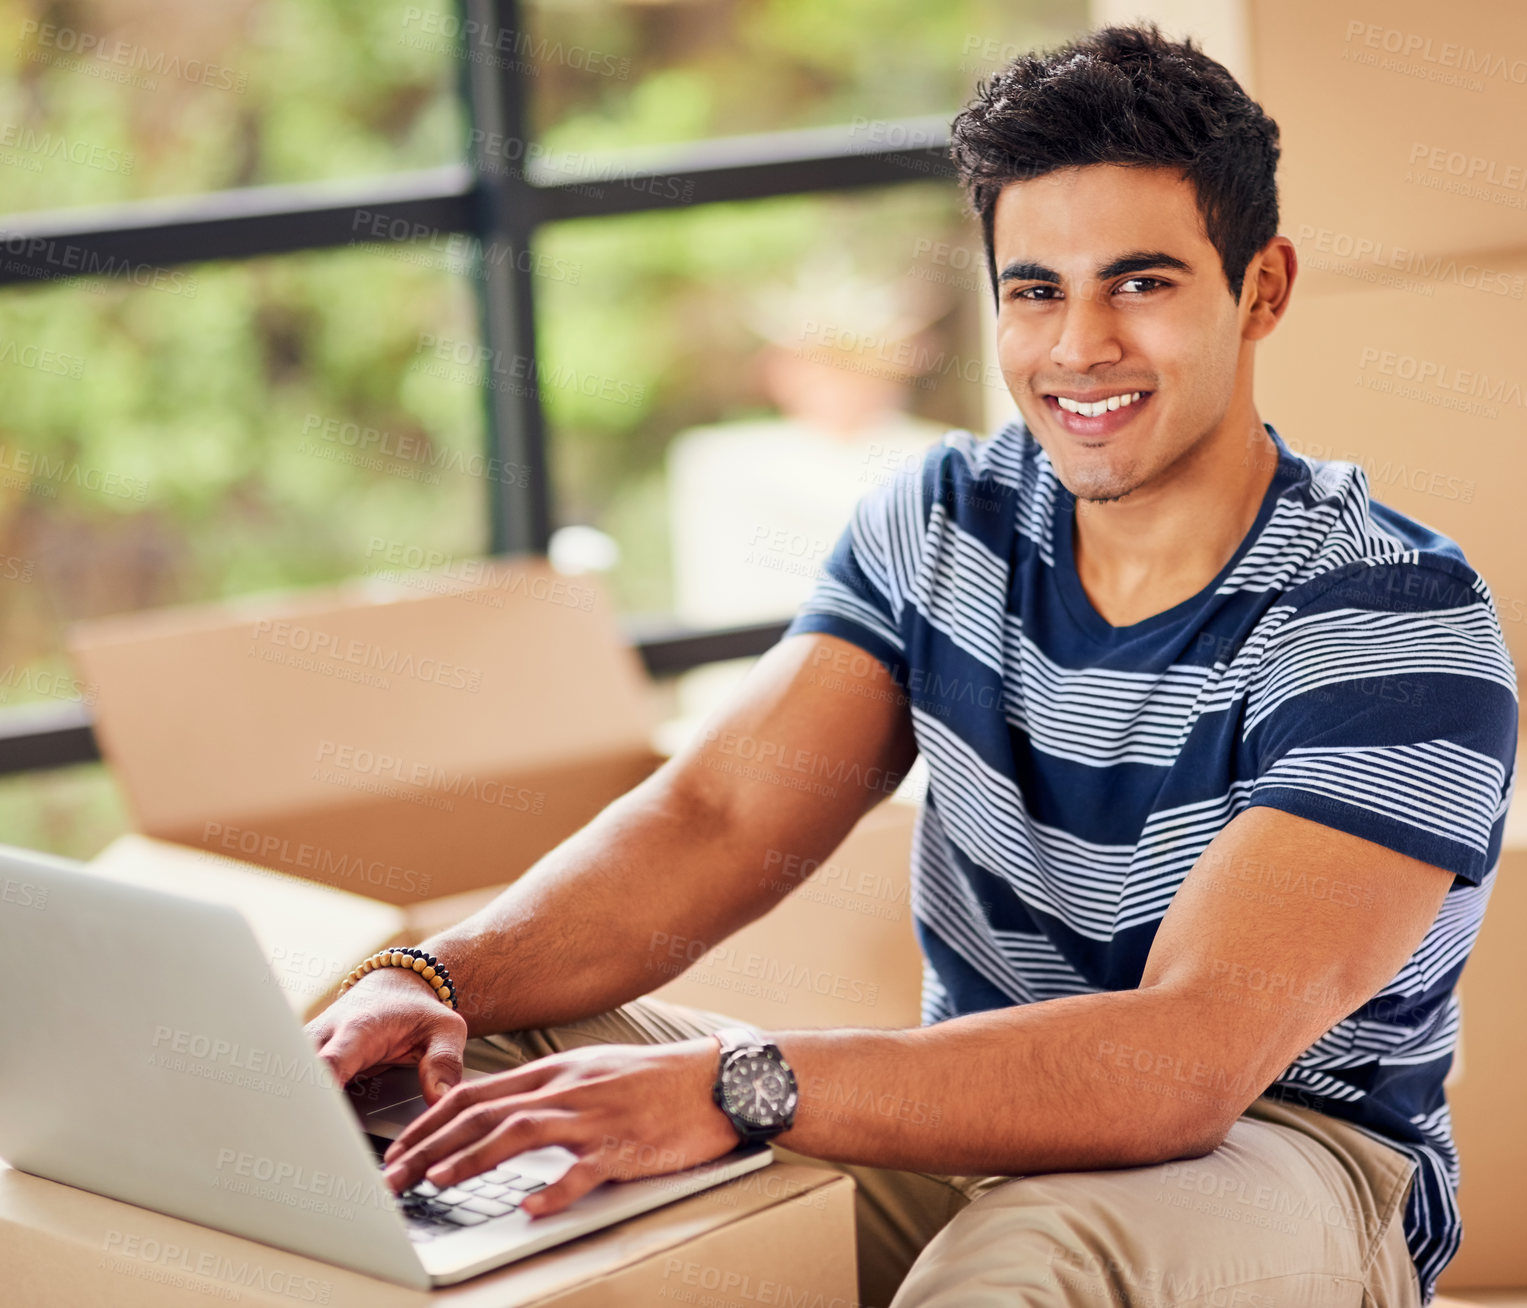 Buy stock photo Portrait of a young man using a laptop while taking a break from moving into a new home